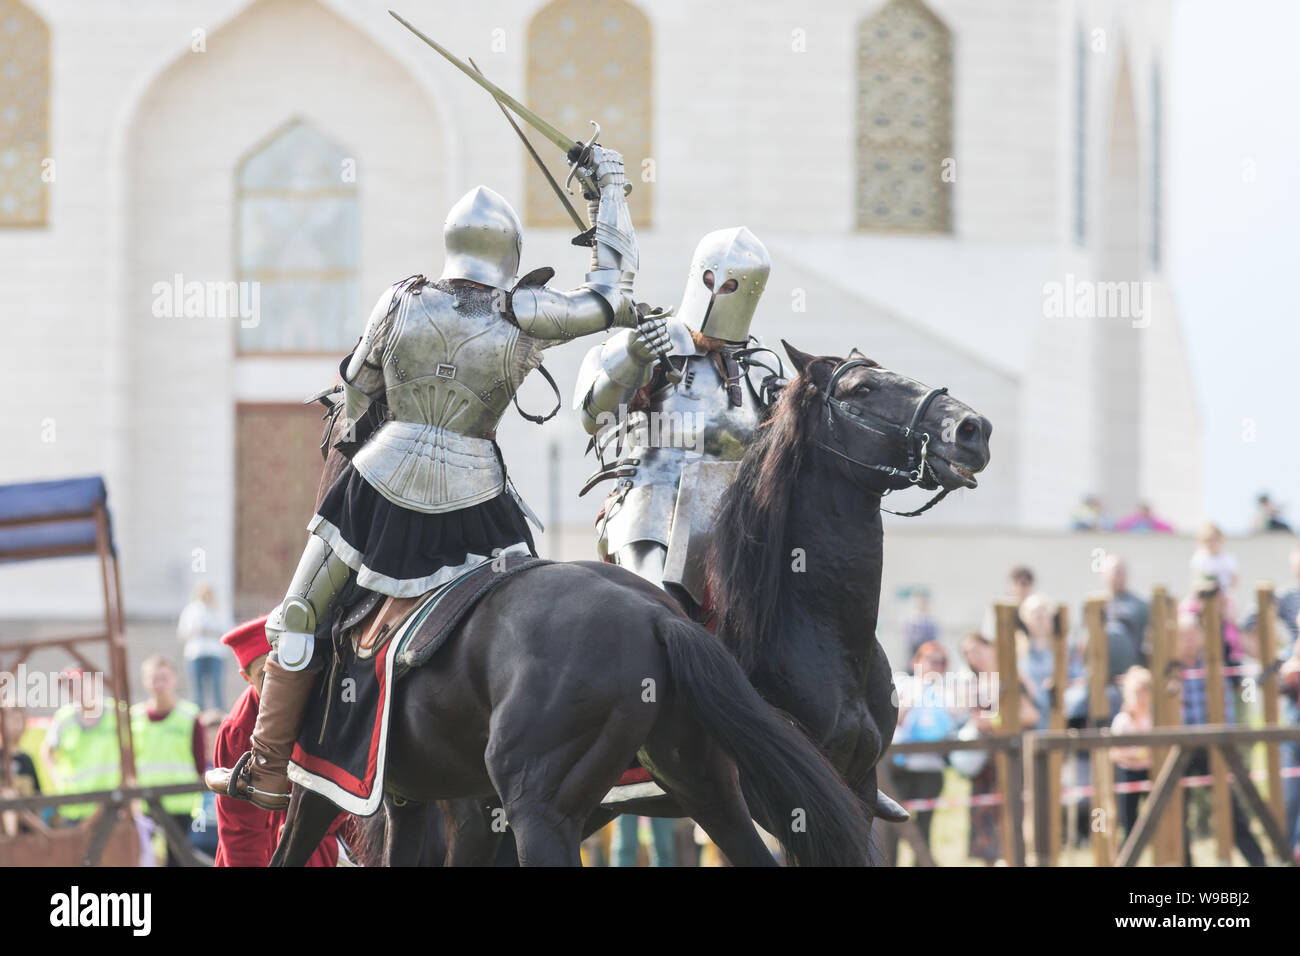 Two men knights riding horses on the battlefield and having a fight - people watching behind the fence Stock Photo